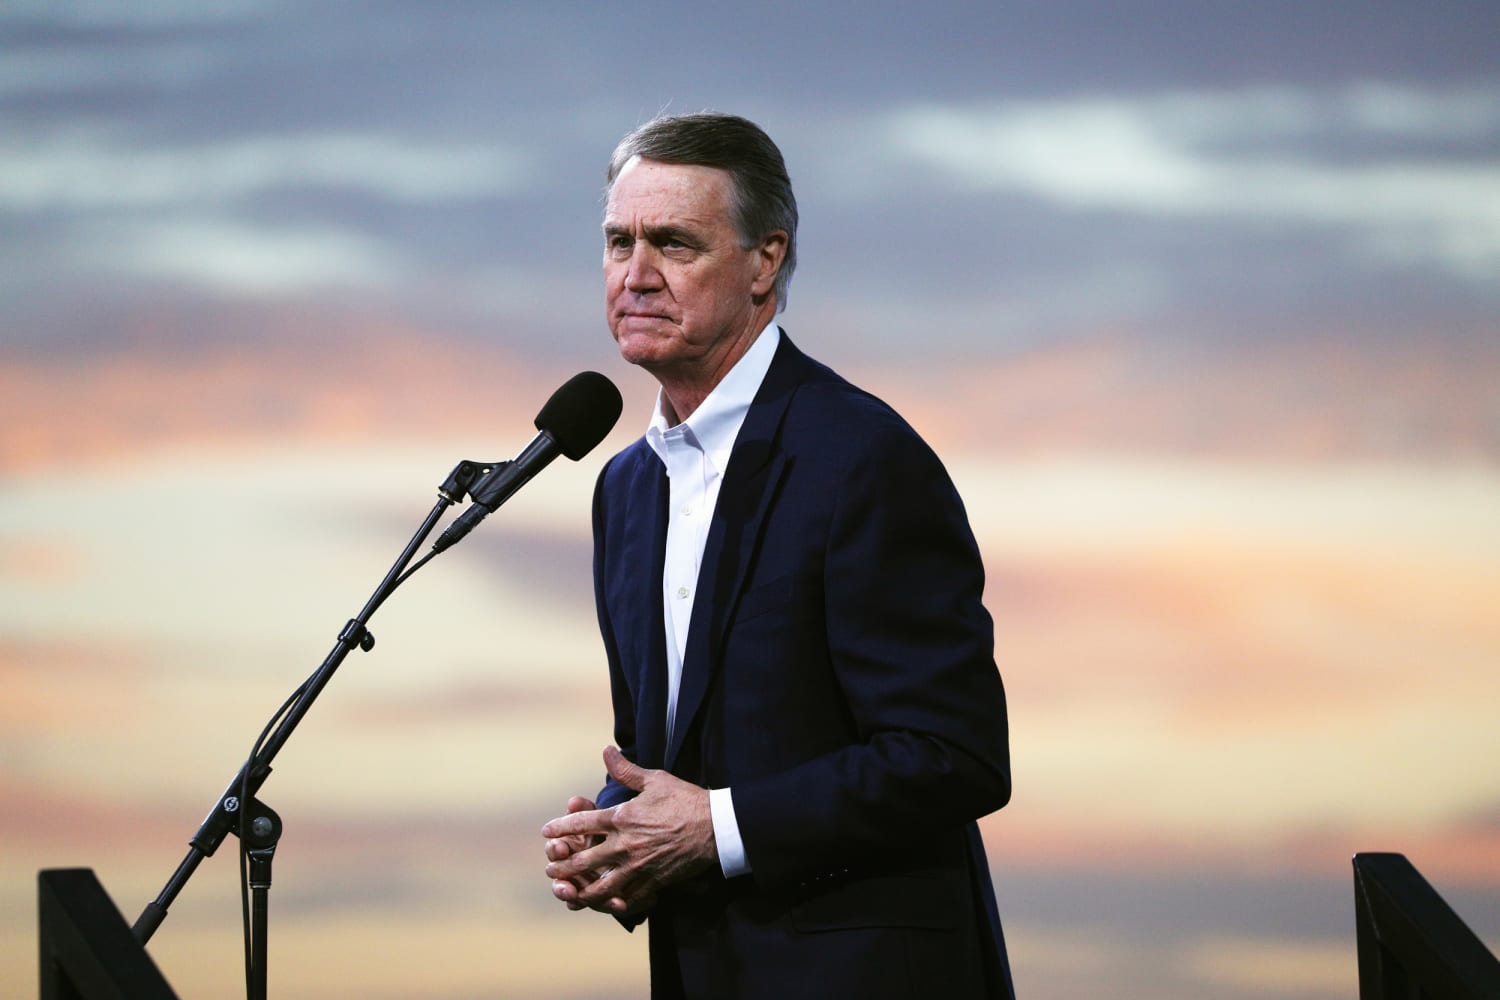 David Perdue joins Georgia governor’s race, setting up GOP showdown with Kemp